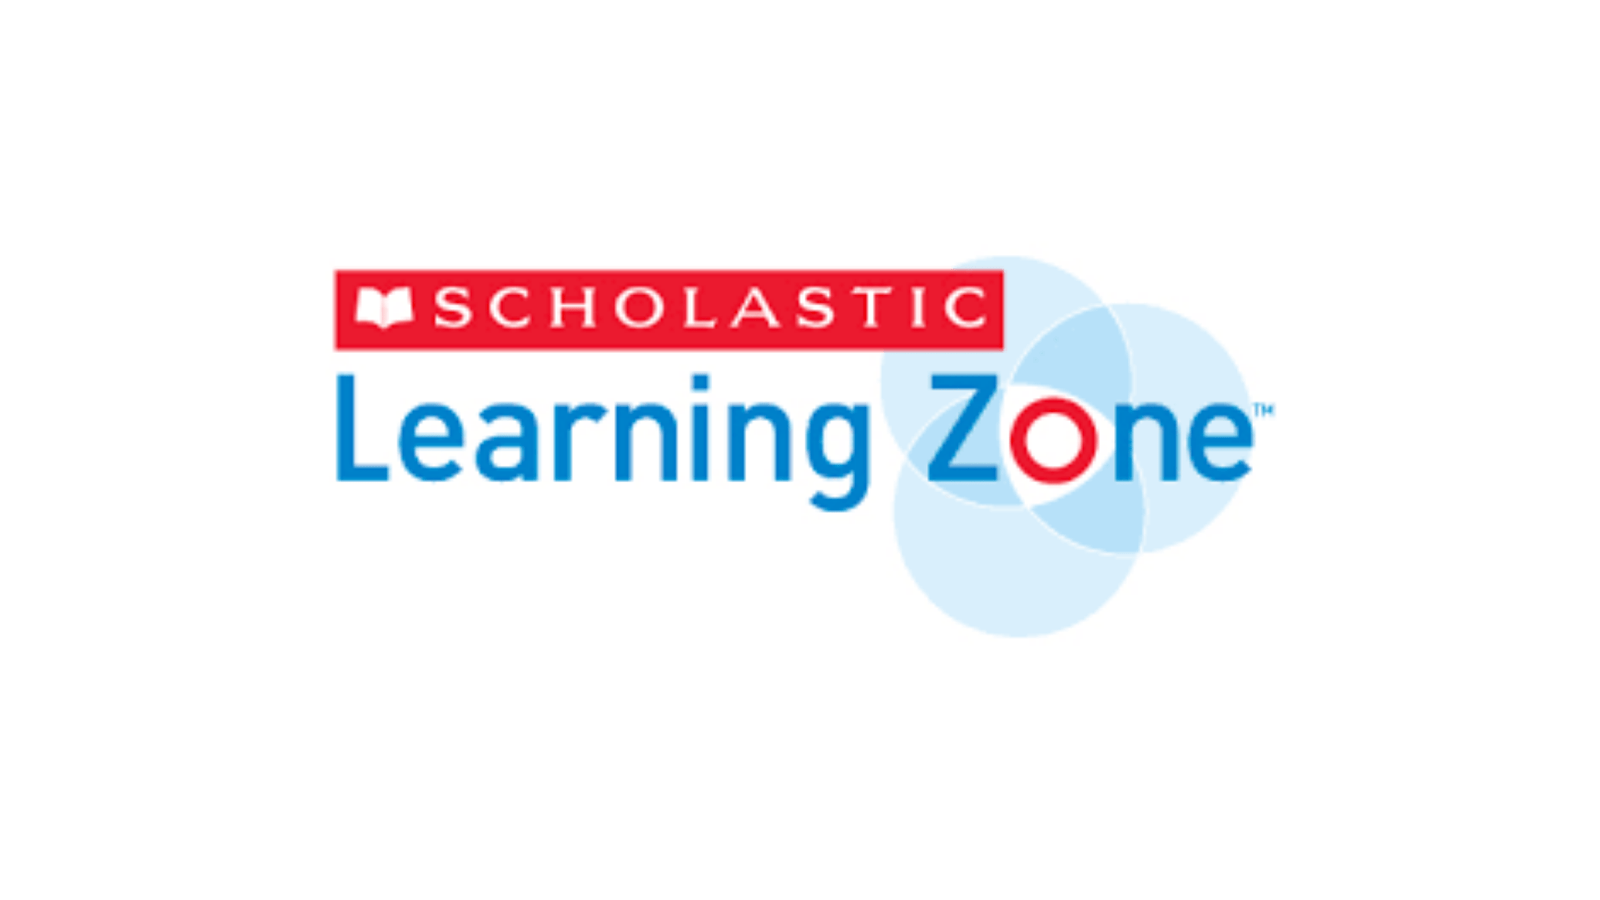 SCHOLASTIC LEARNING ZONE